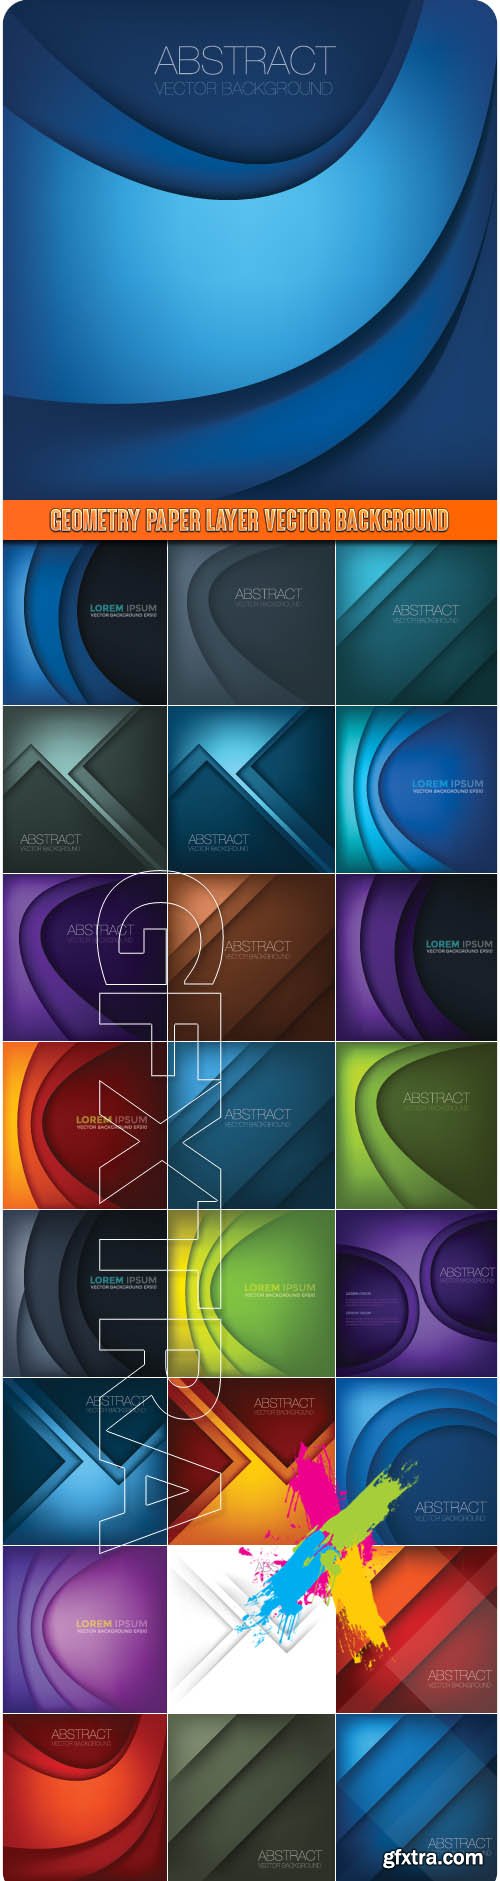 Geometry paper layer vector background